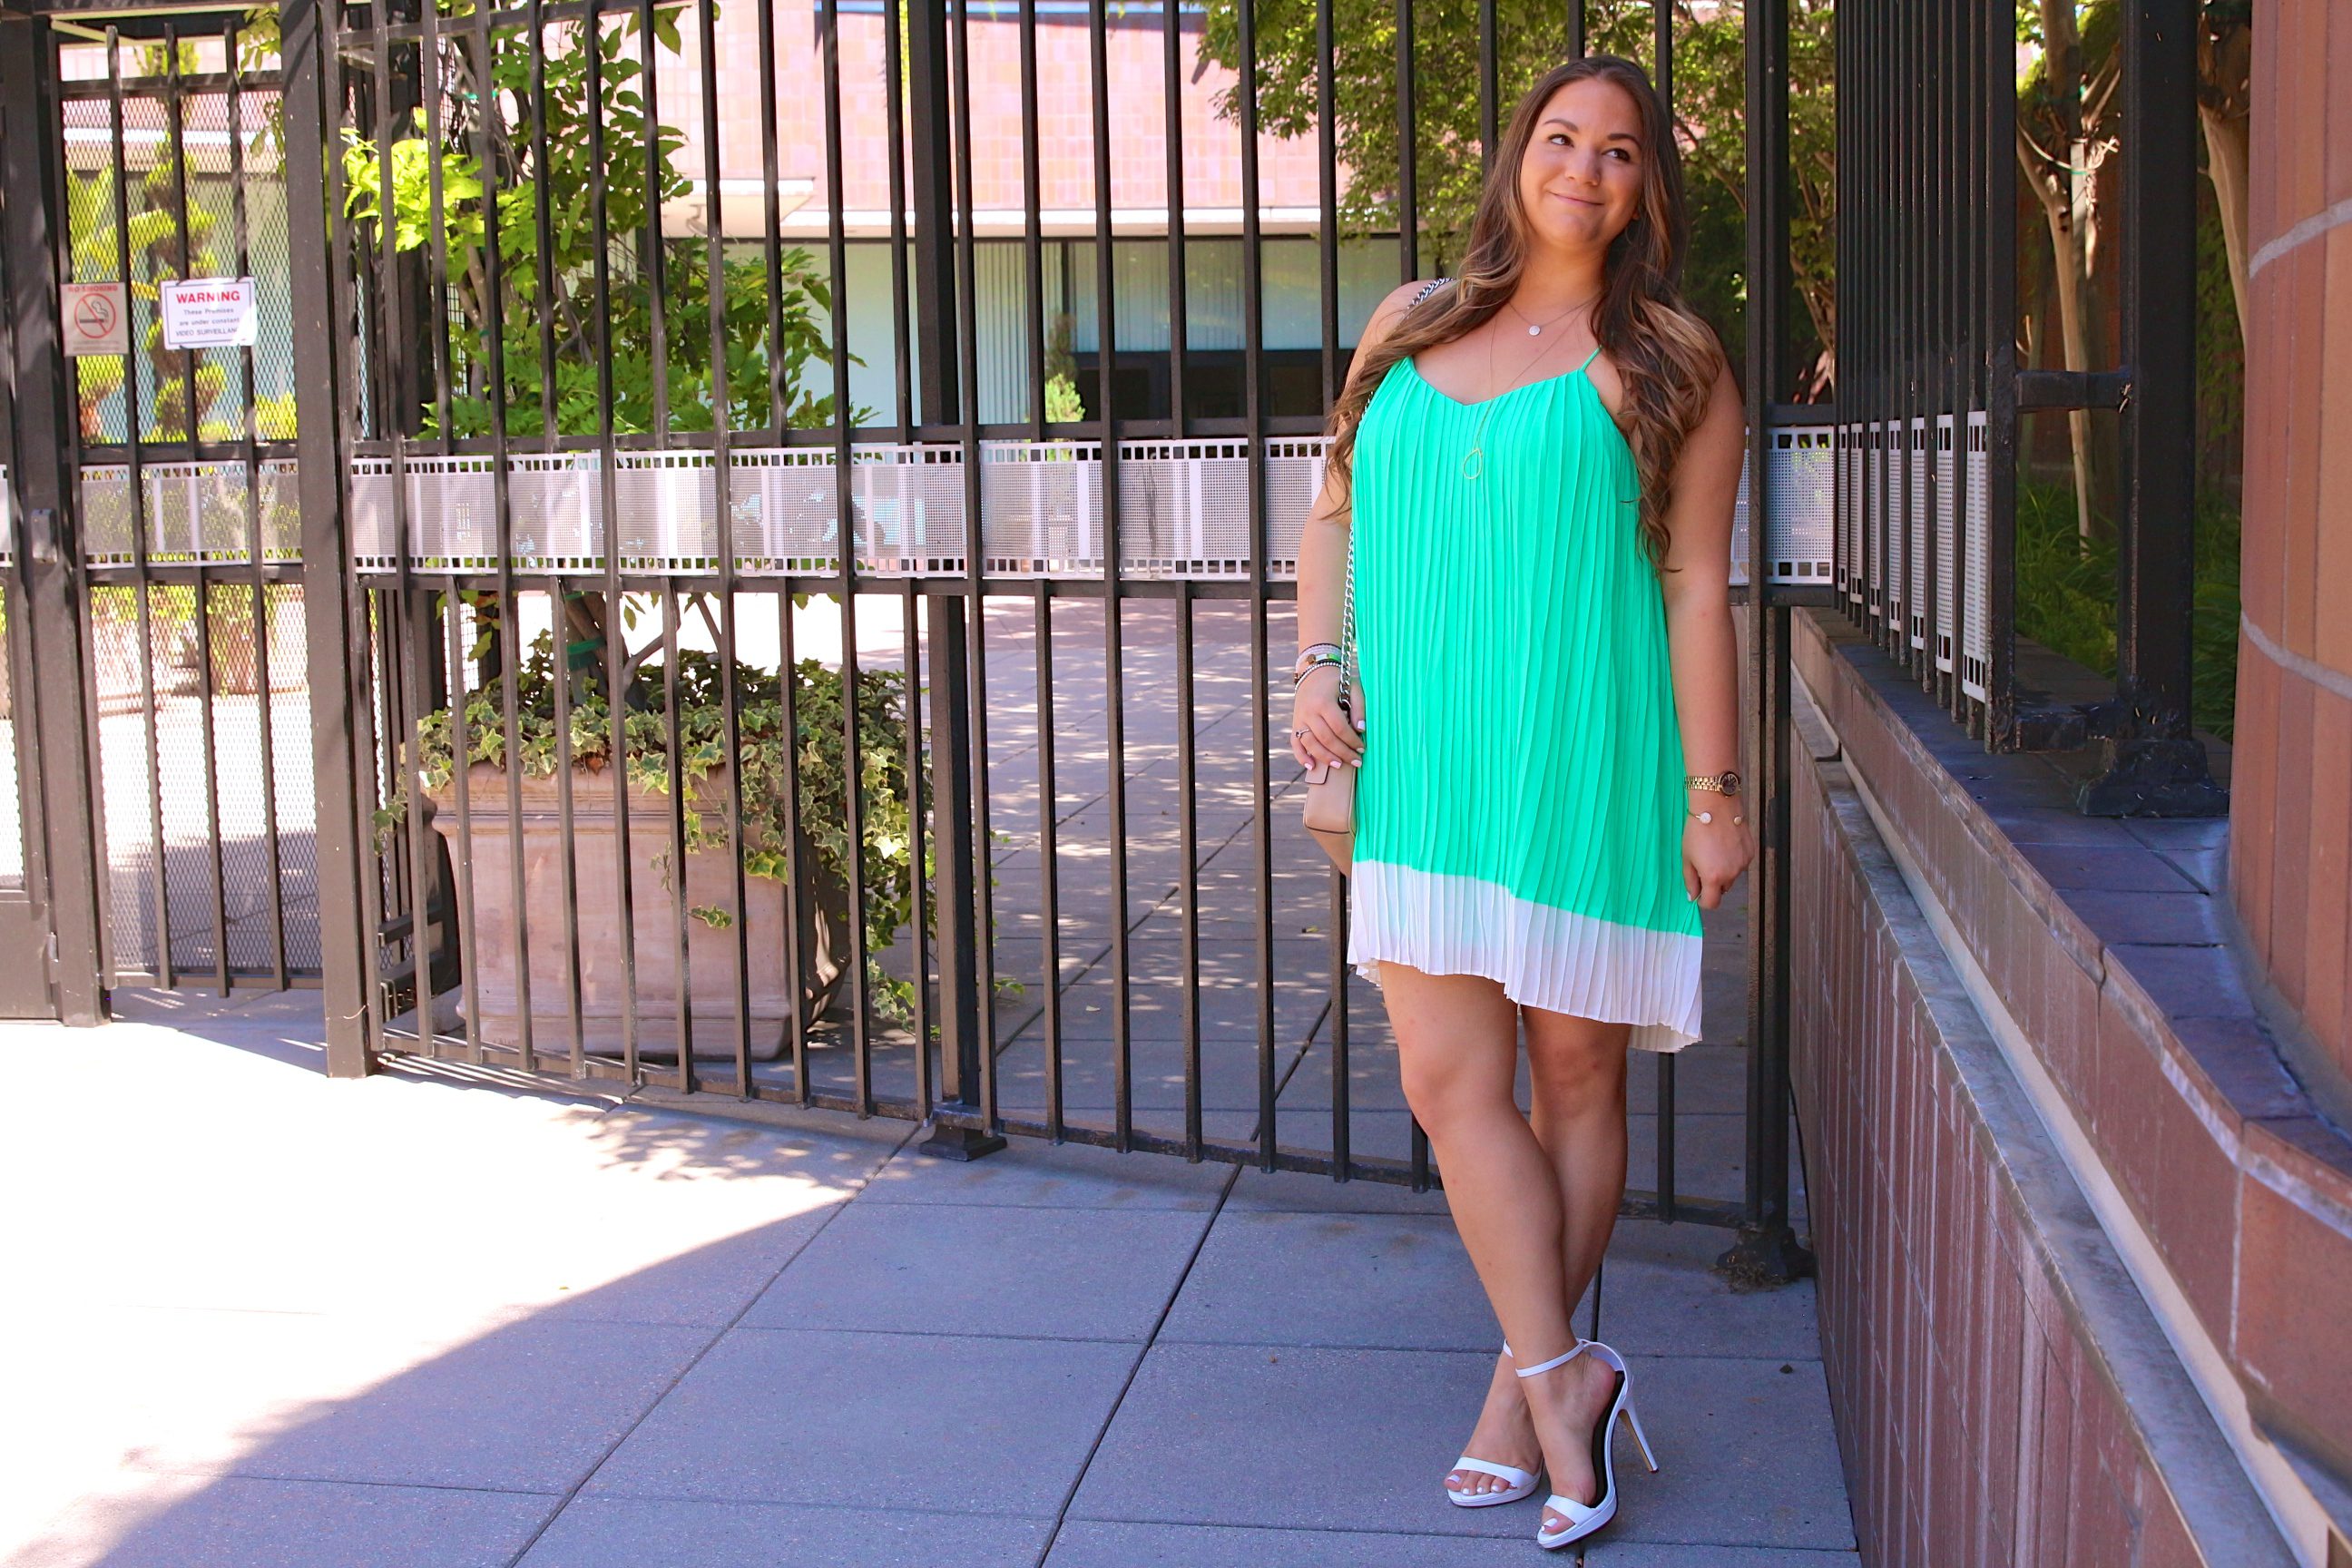 missyonmadison, melissa tierney, la blogger, la photography, la, fashion blogger, outfit inspo, outfit inspiration, mint green dress, shop the mint, mint julep, white ankle strap heels, white ankle strap sandals, michael antonio white heels, dsw, dsw shoe lovers, coach crossbody, beige coach crossbody, beige crossbody bag, brunette hair, curled hair, brunette hairstyle, circle necklace, circle pendant necklace, x ring, how to wear color, how to wear green, summer dresses,